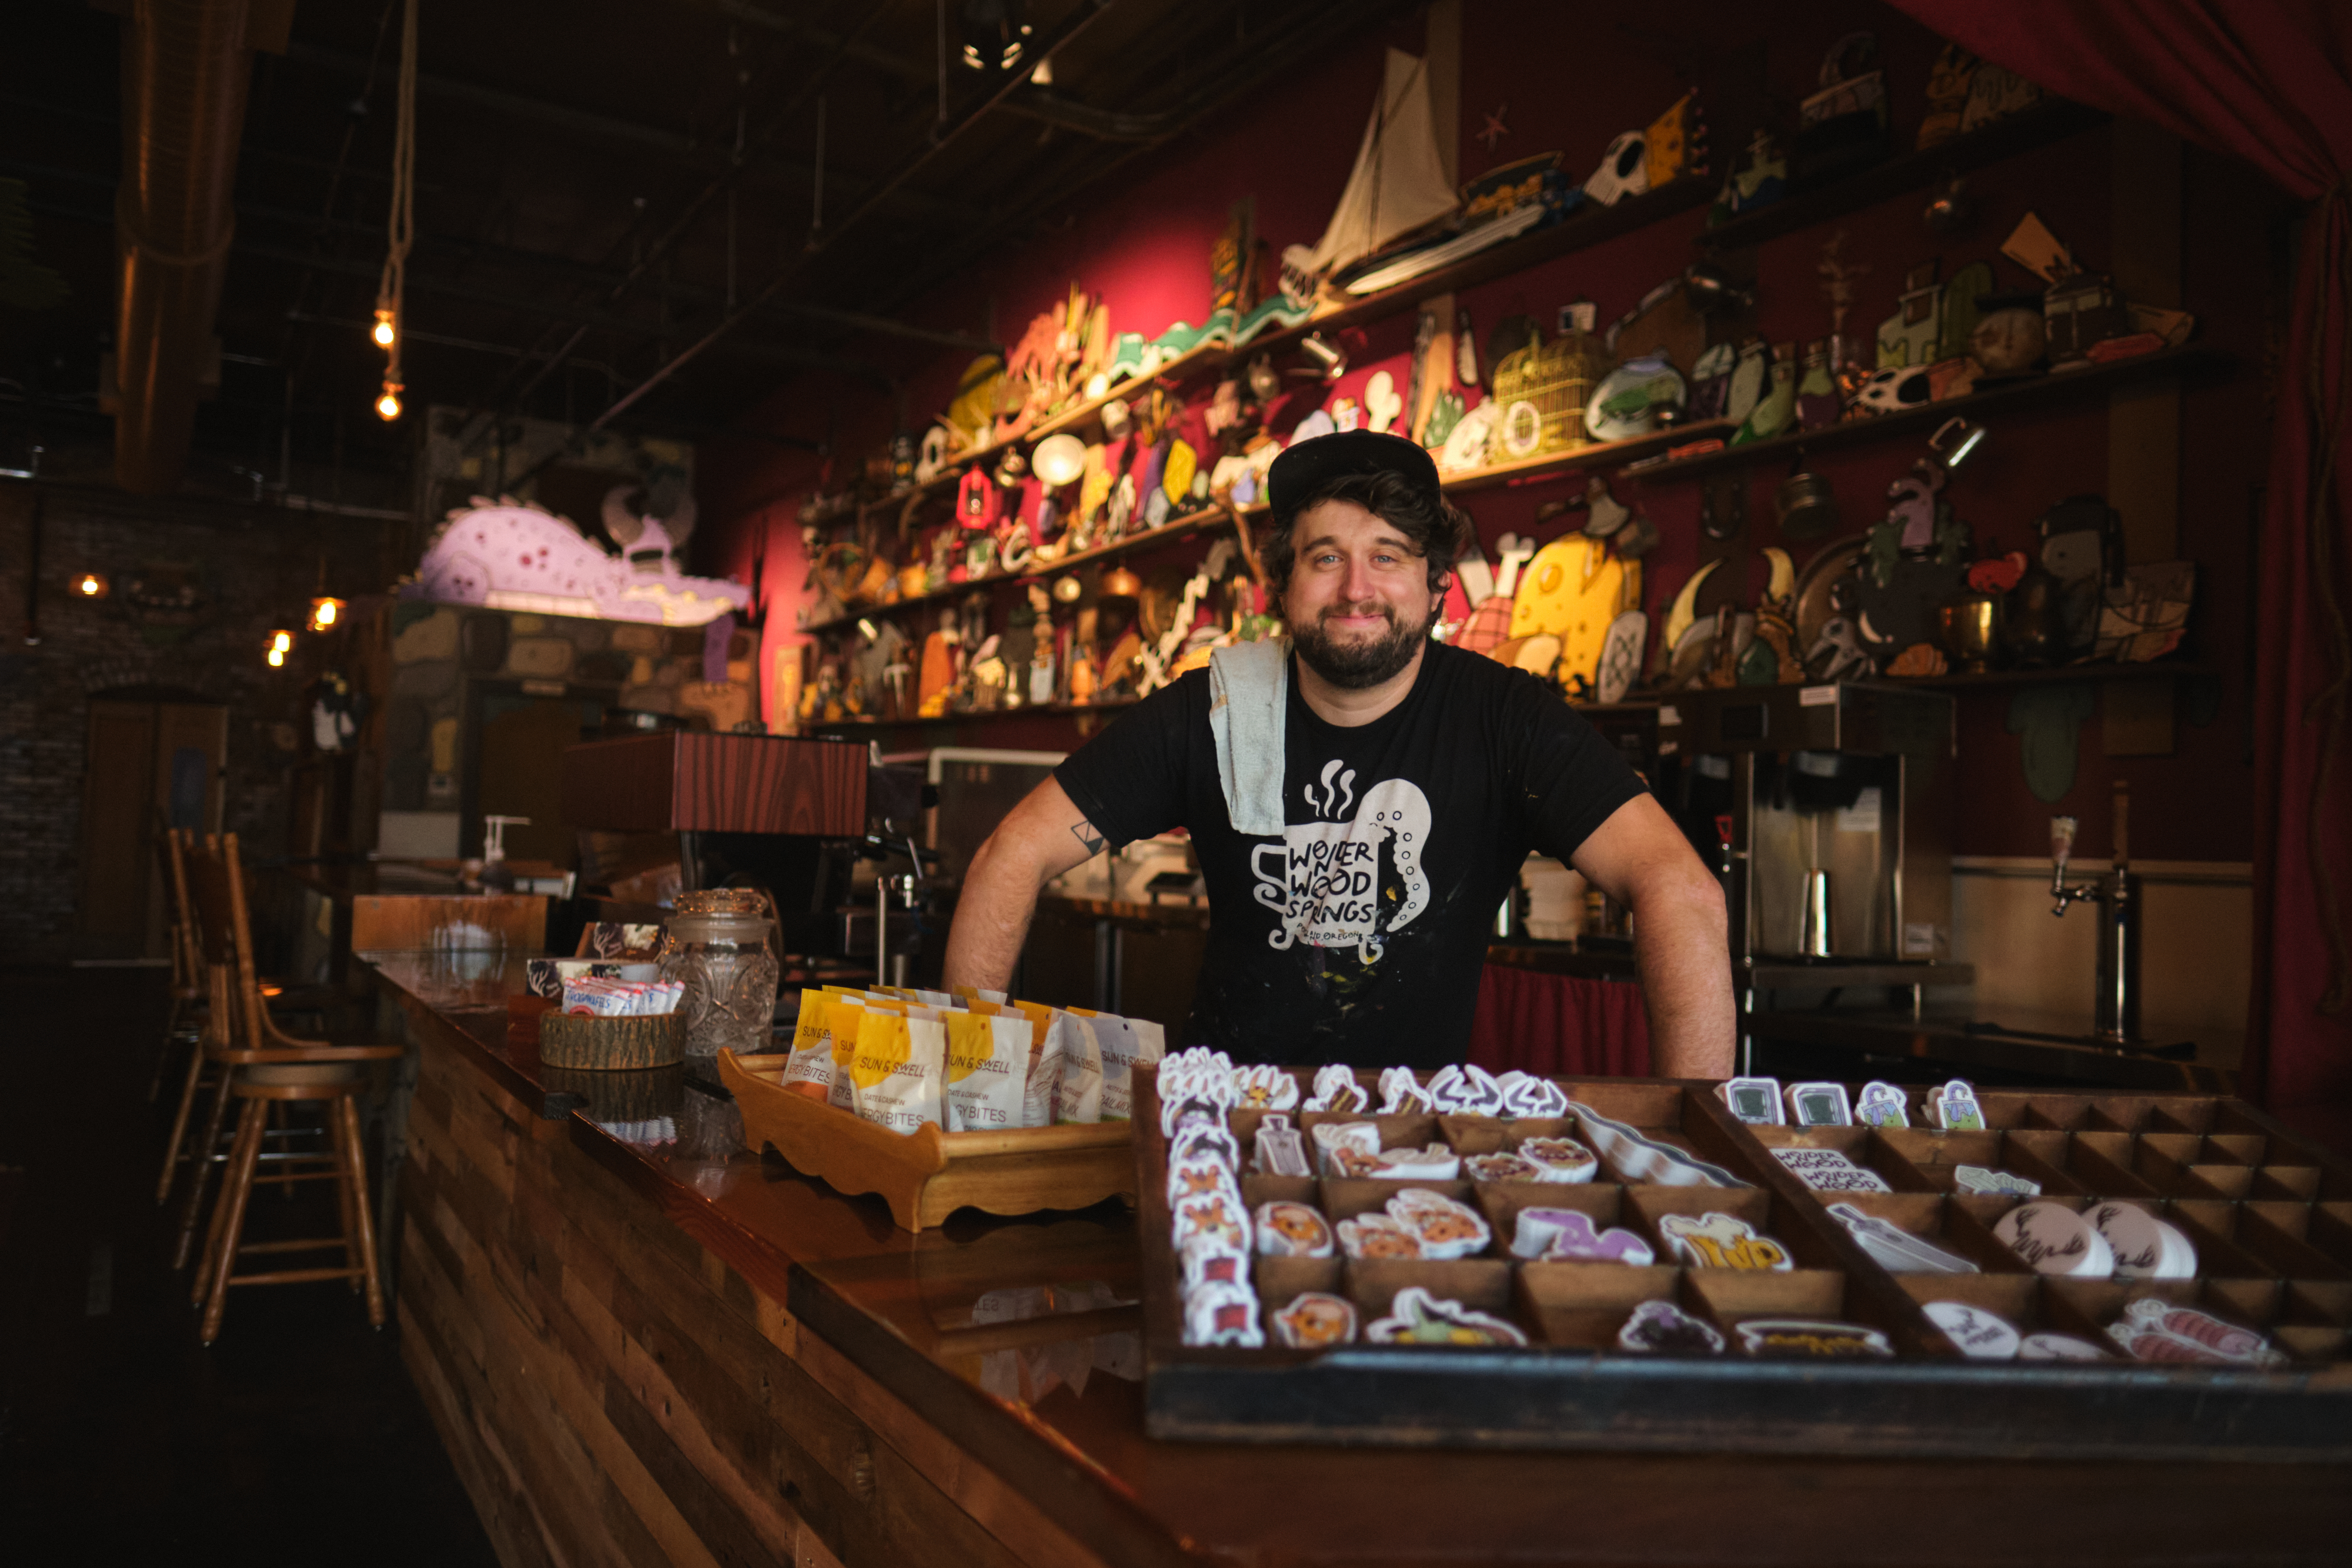 Mike Bennett stands behind the bar and in front of a large gallery wall of hand-painted art at his cafe.